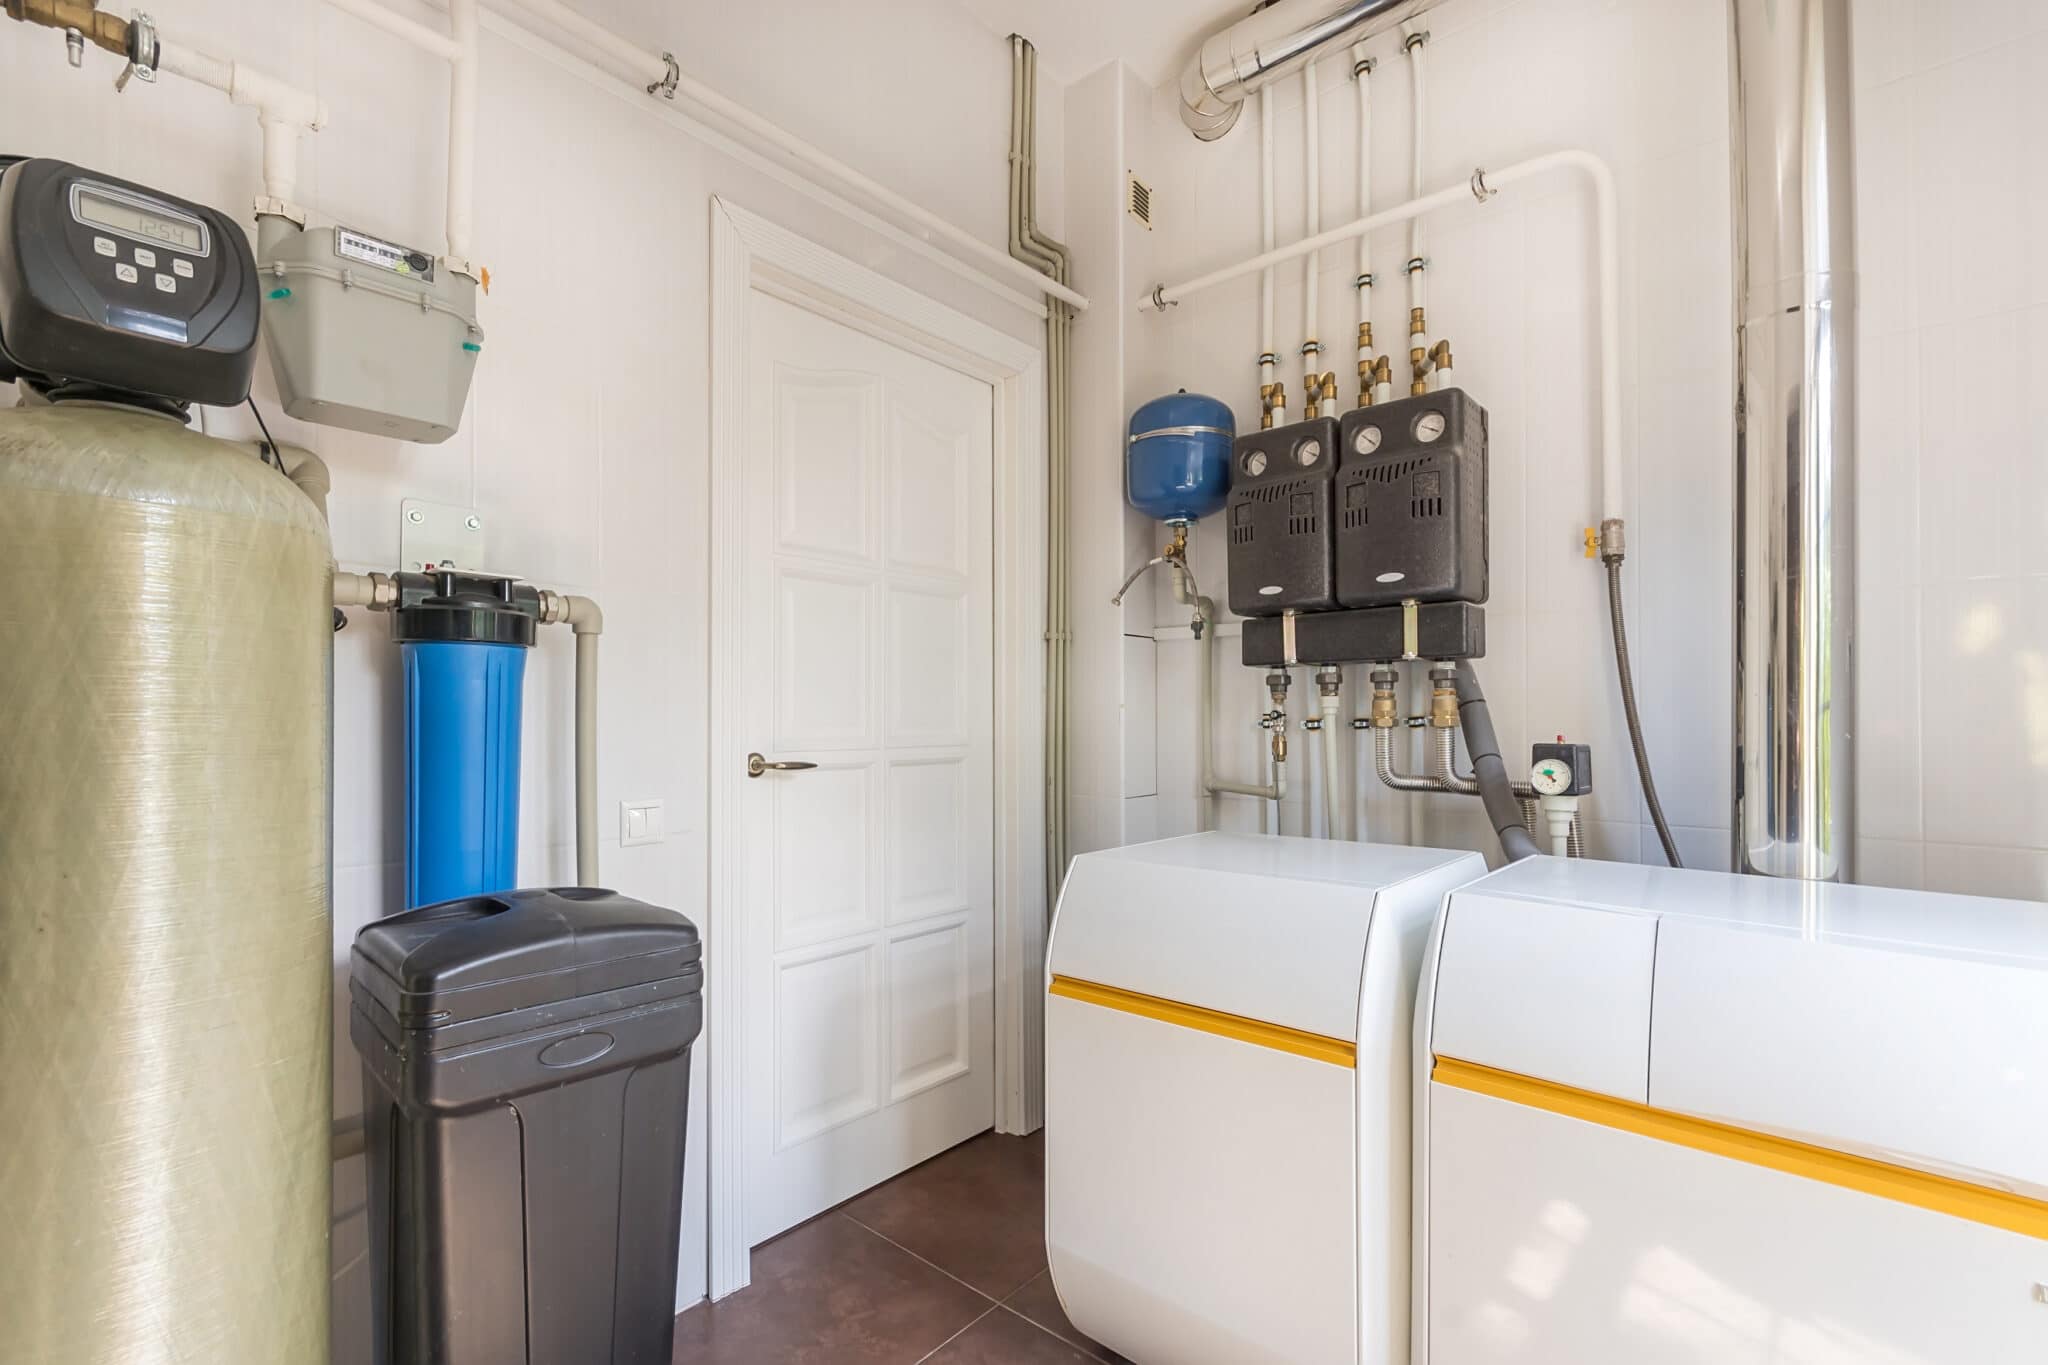 Gas Boiler room in a private house. Water filtration and softener system